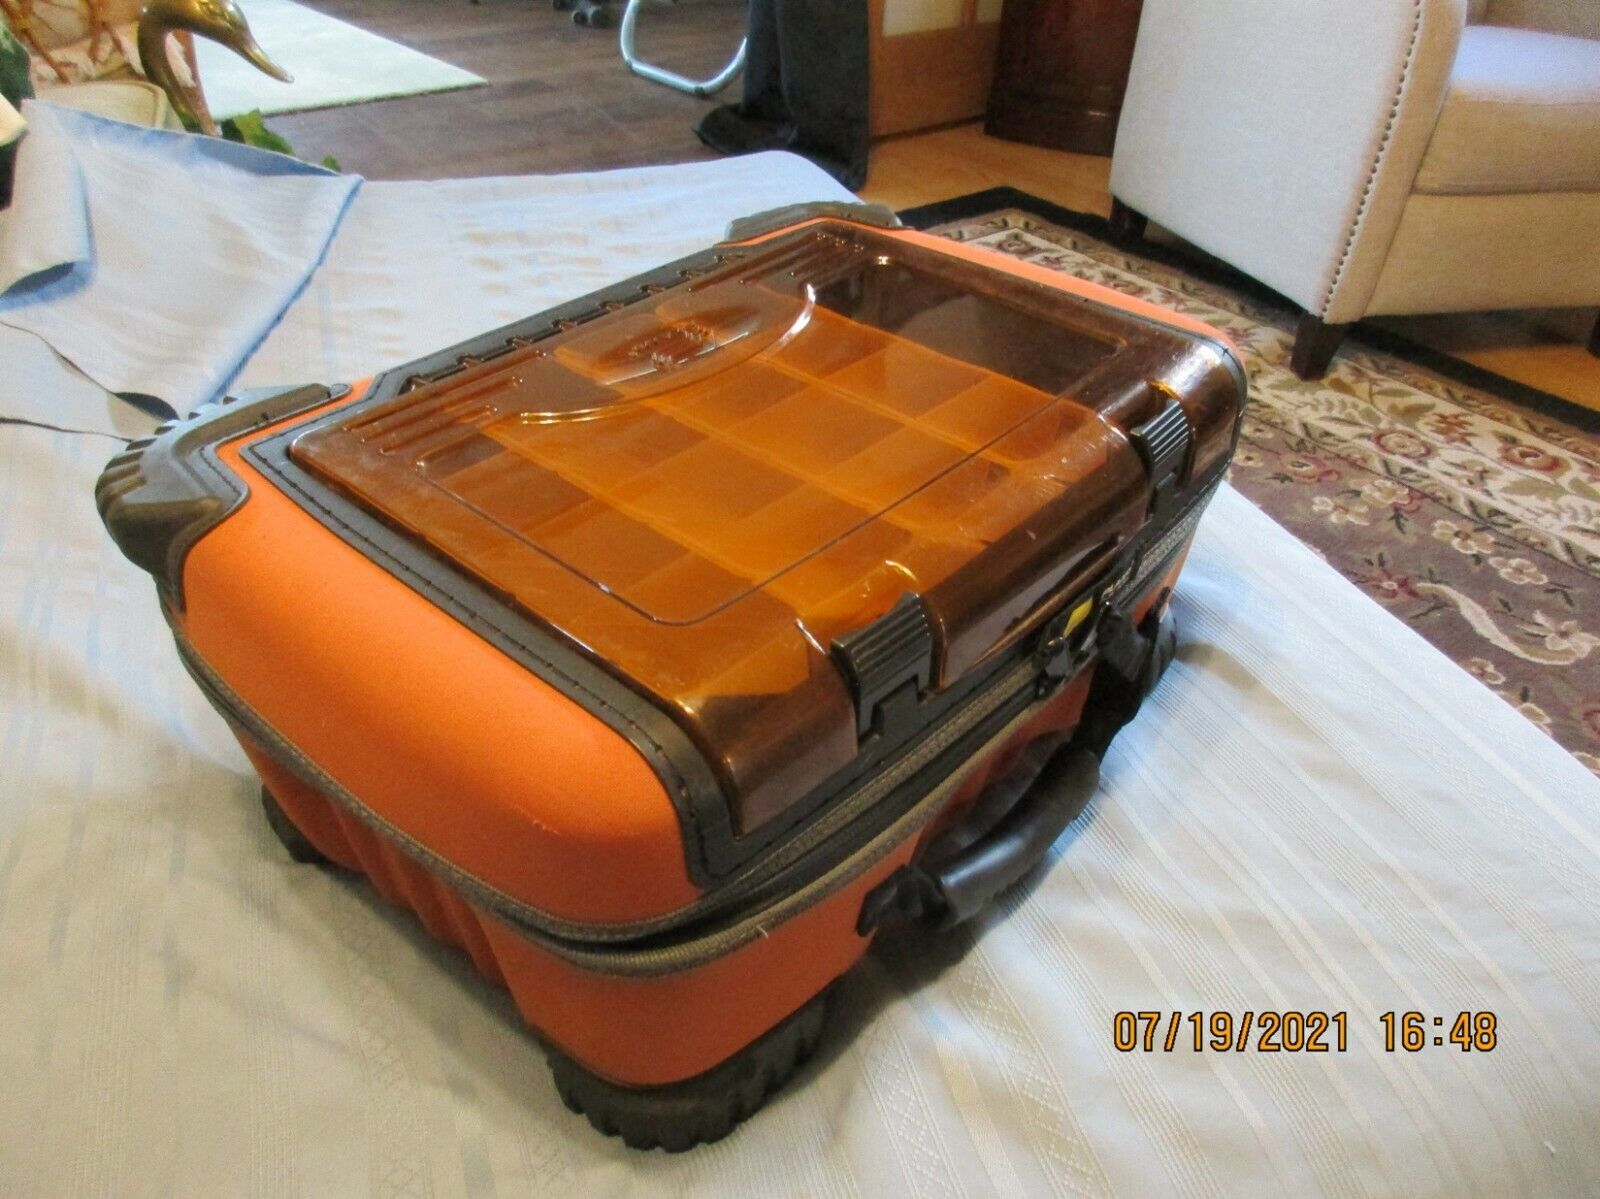 Plano Guide Series flit top Orange fabric 売れ筋 hard sided オープニング used tackle box covered gd